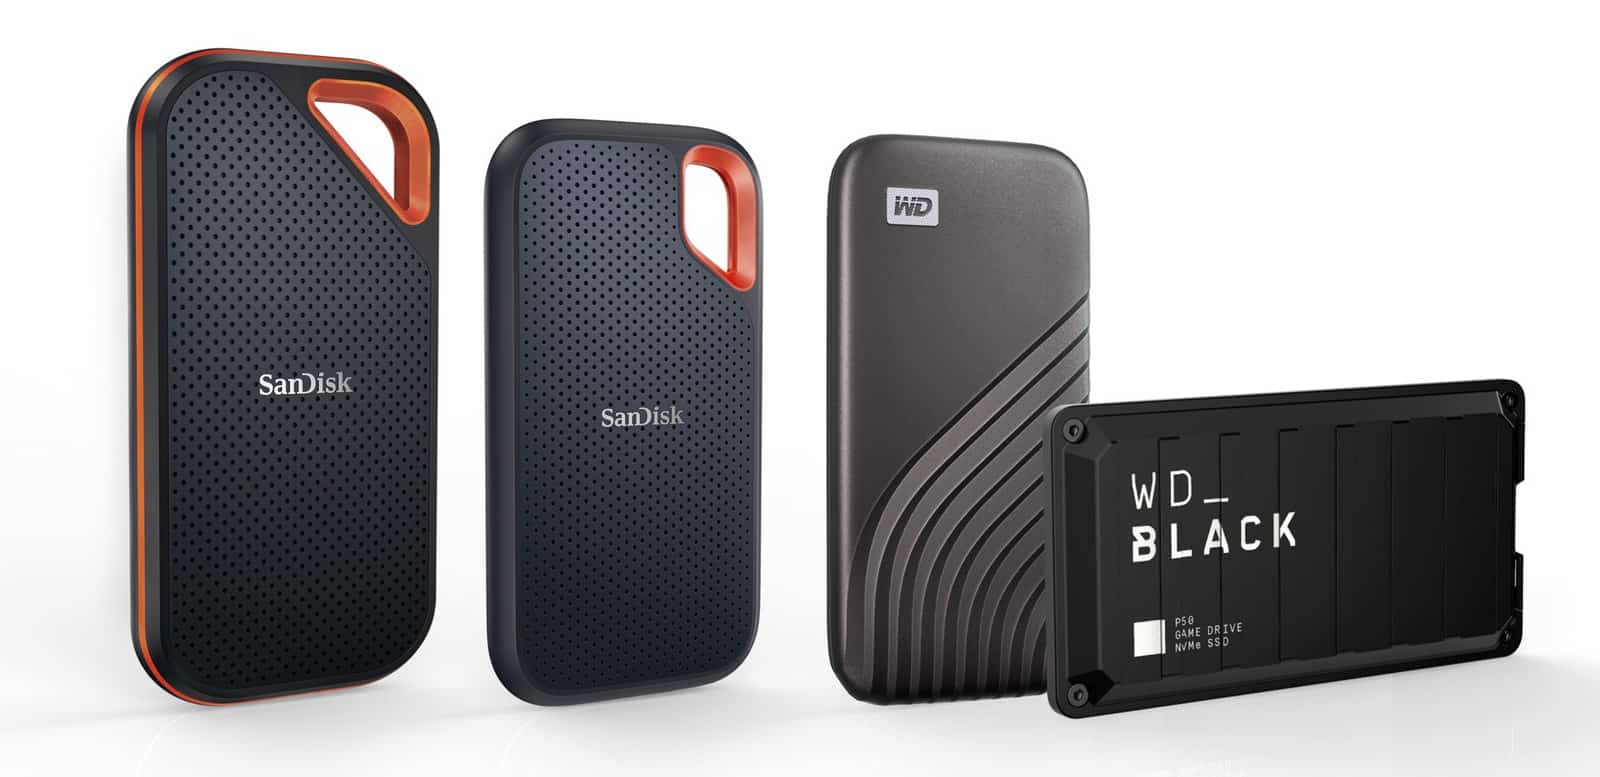 Western Digital Delivers unmatched line-up of high-capacity portable SSDs